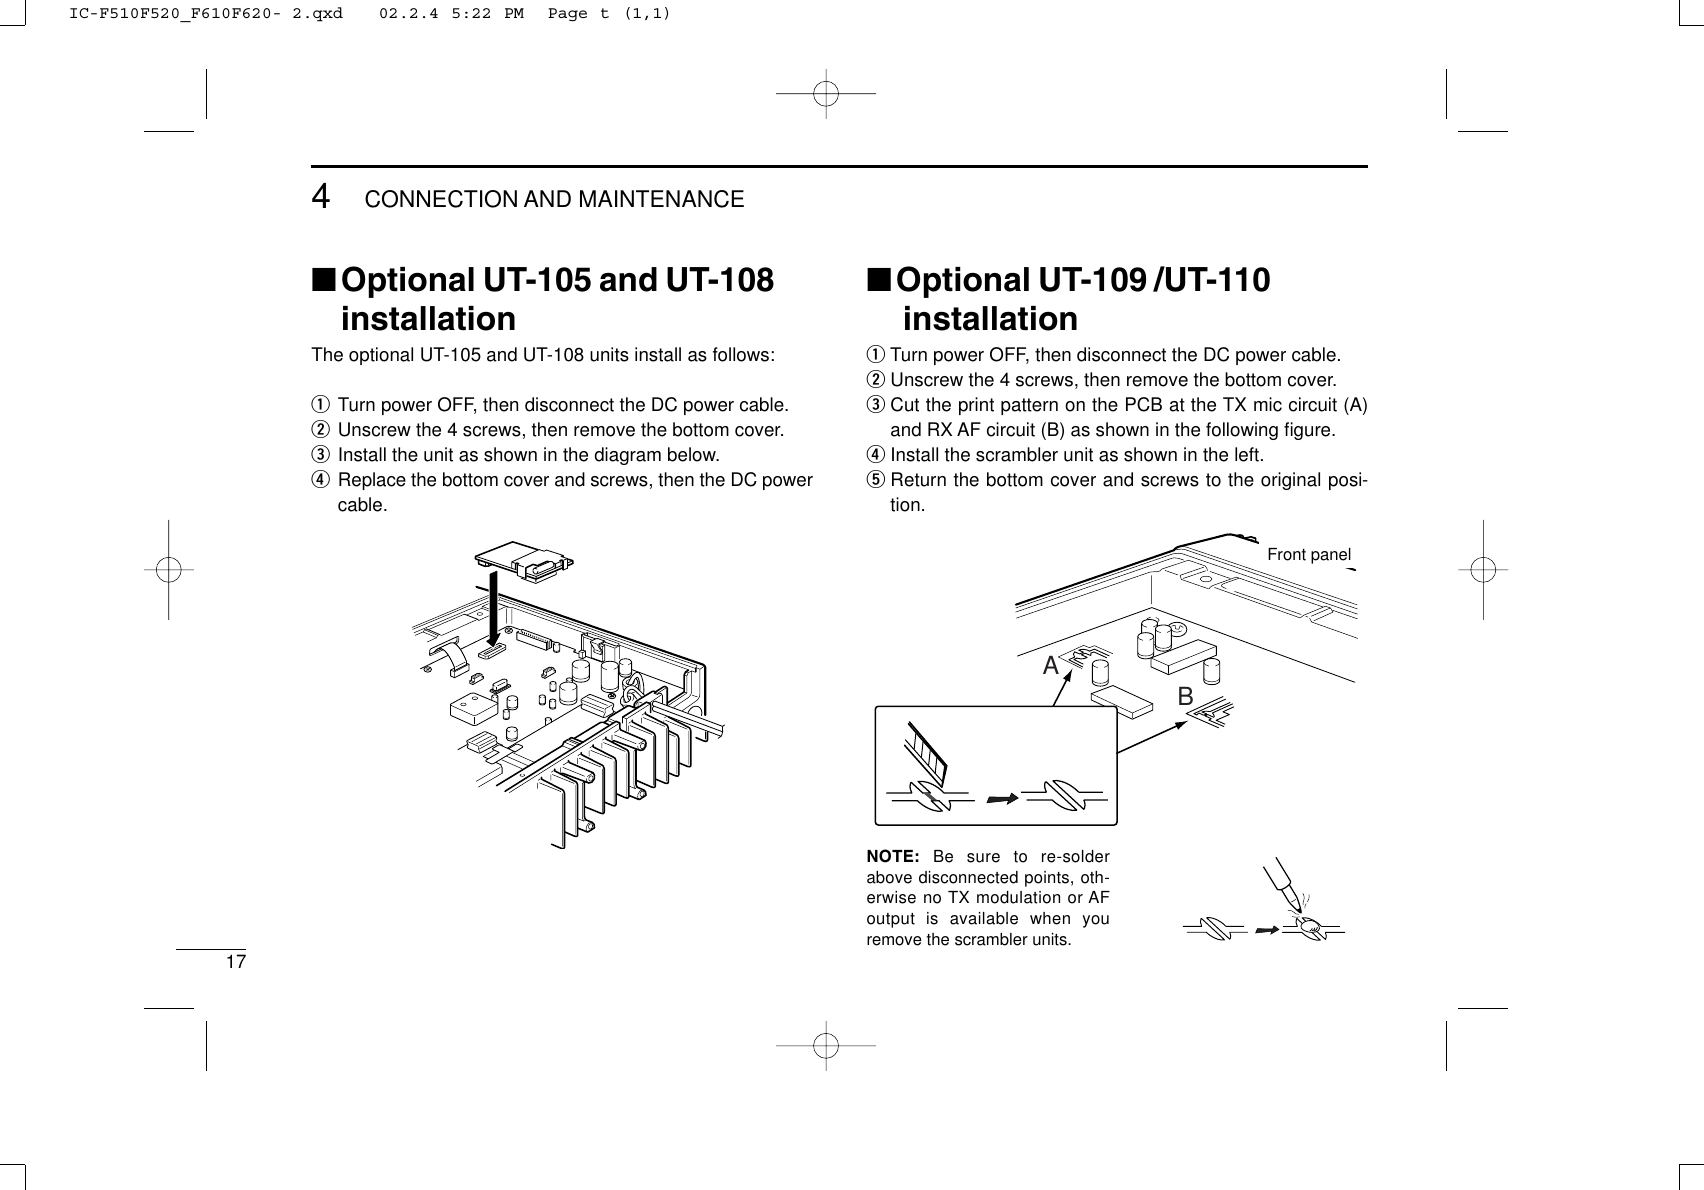 174CONNECTION AND MAINTENANCE■Optional UT-105 and UT-108installationThe optional UT-105 and UT-108 units install as follows:qTurn power OFF, then disconnect the DC power cable.wUnscrew the 4 screws, then remove the bottom cover.eInstall the unit as shown in the diagram below.rReplace the bottom cover and screws, then the DC powercable.■Optional UT-109 /UT-110installationqTurn power OFF, then disconnect the DC power cable.wUnscrew the 4 screws, then remove the bottom cover.eCut the print pattern on the PCB at the TX mic circuit (A)and RX AF circuit (B) as shown in the following ﬁgure.rInstall the scrambler unit as shown in the left.tReturn the bottom cover and screws to the original posi-tion.NOTE: Be sure to re-solderabove disconnected points, oth-erwise no TX modulation or AFoutput is available when youremove the scrambler units.ABFront panelIC-F510F520_F610F620- 2.qxd   02.2.4 5:22 PM  Page t (1,1)